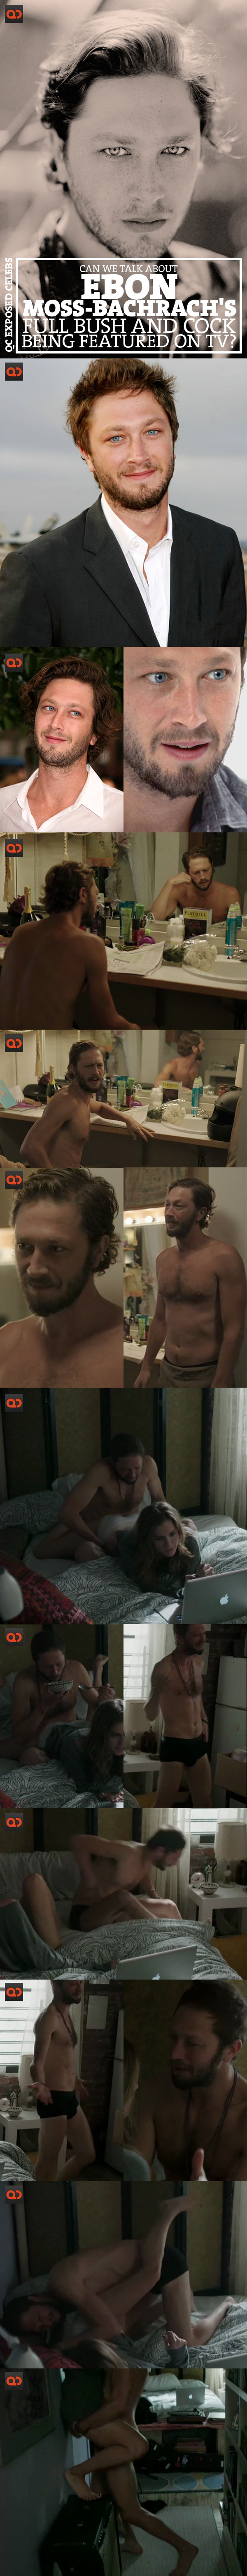 Can We Talk About Ebon Moss-bachrach's Full Bush And Cock Being Featured On TV?